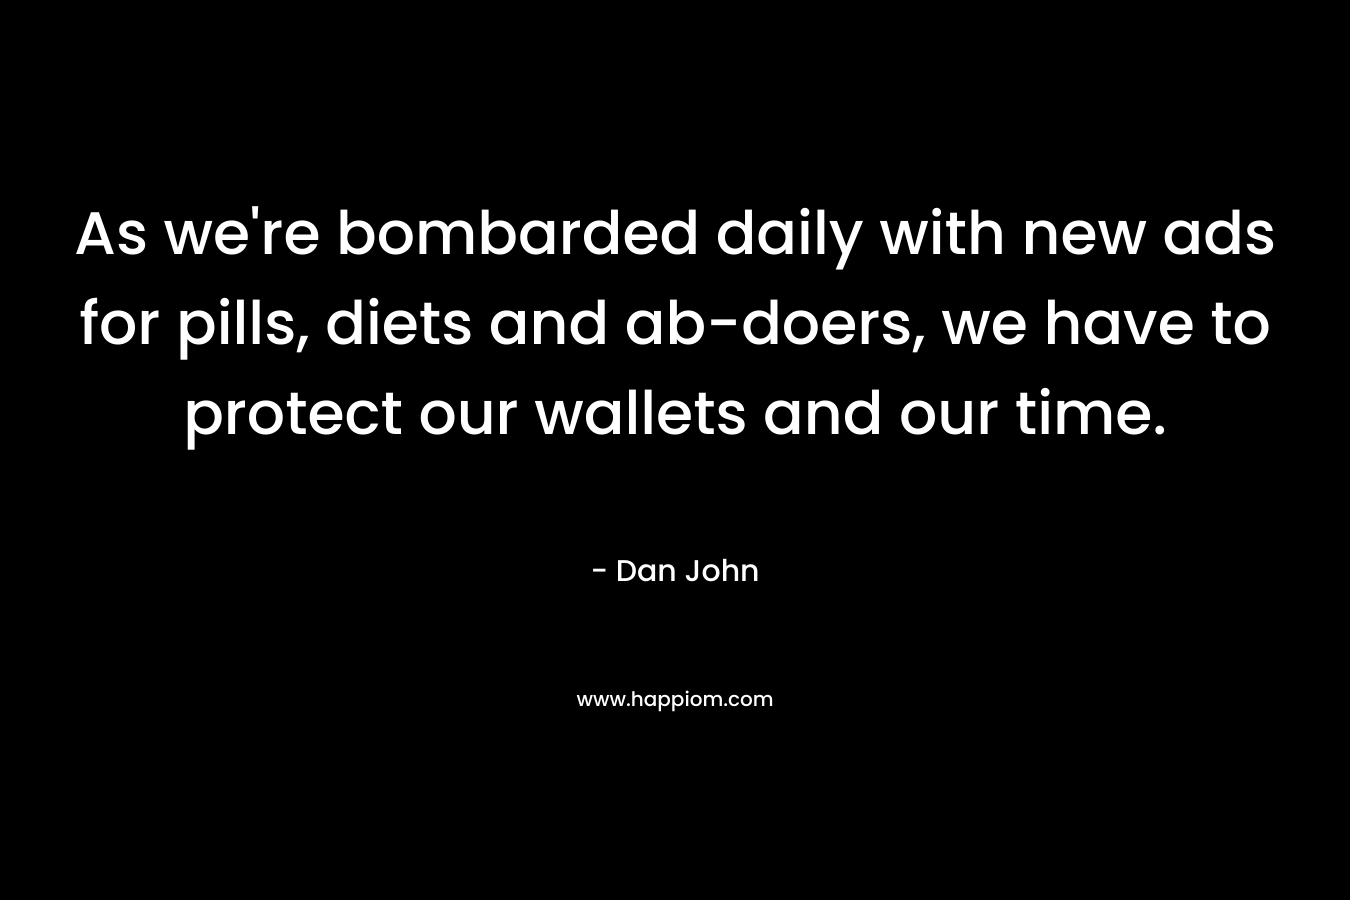 As we're bombarded daily with new ads for pills, diets and ab-doers, we have to protect our wallets and our time.